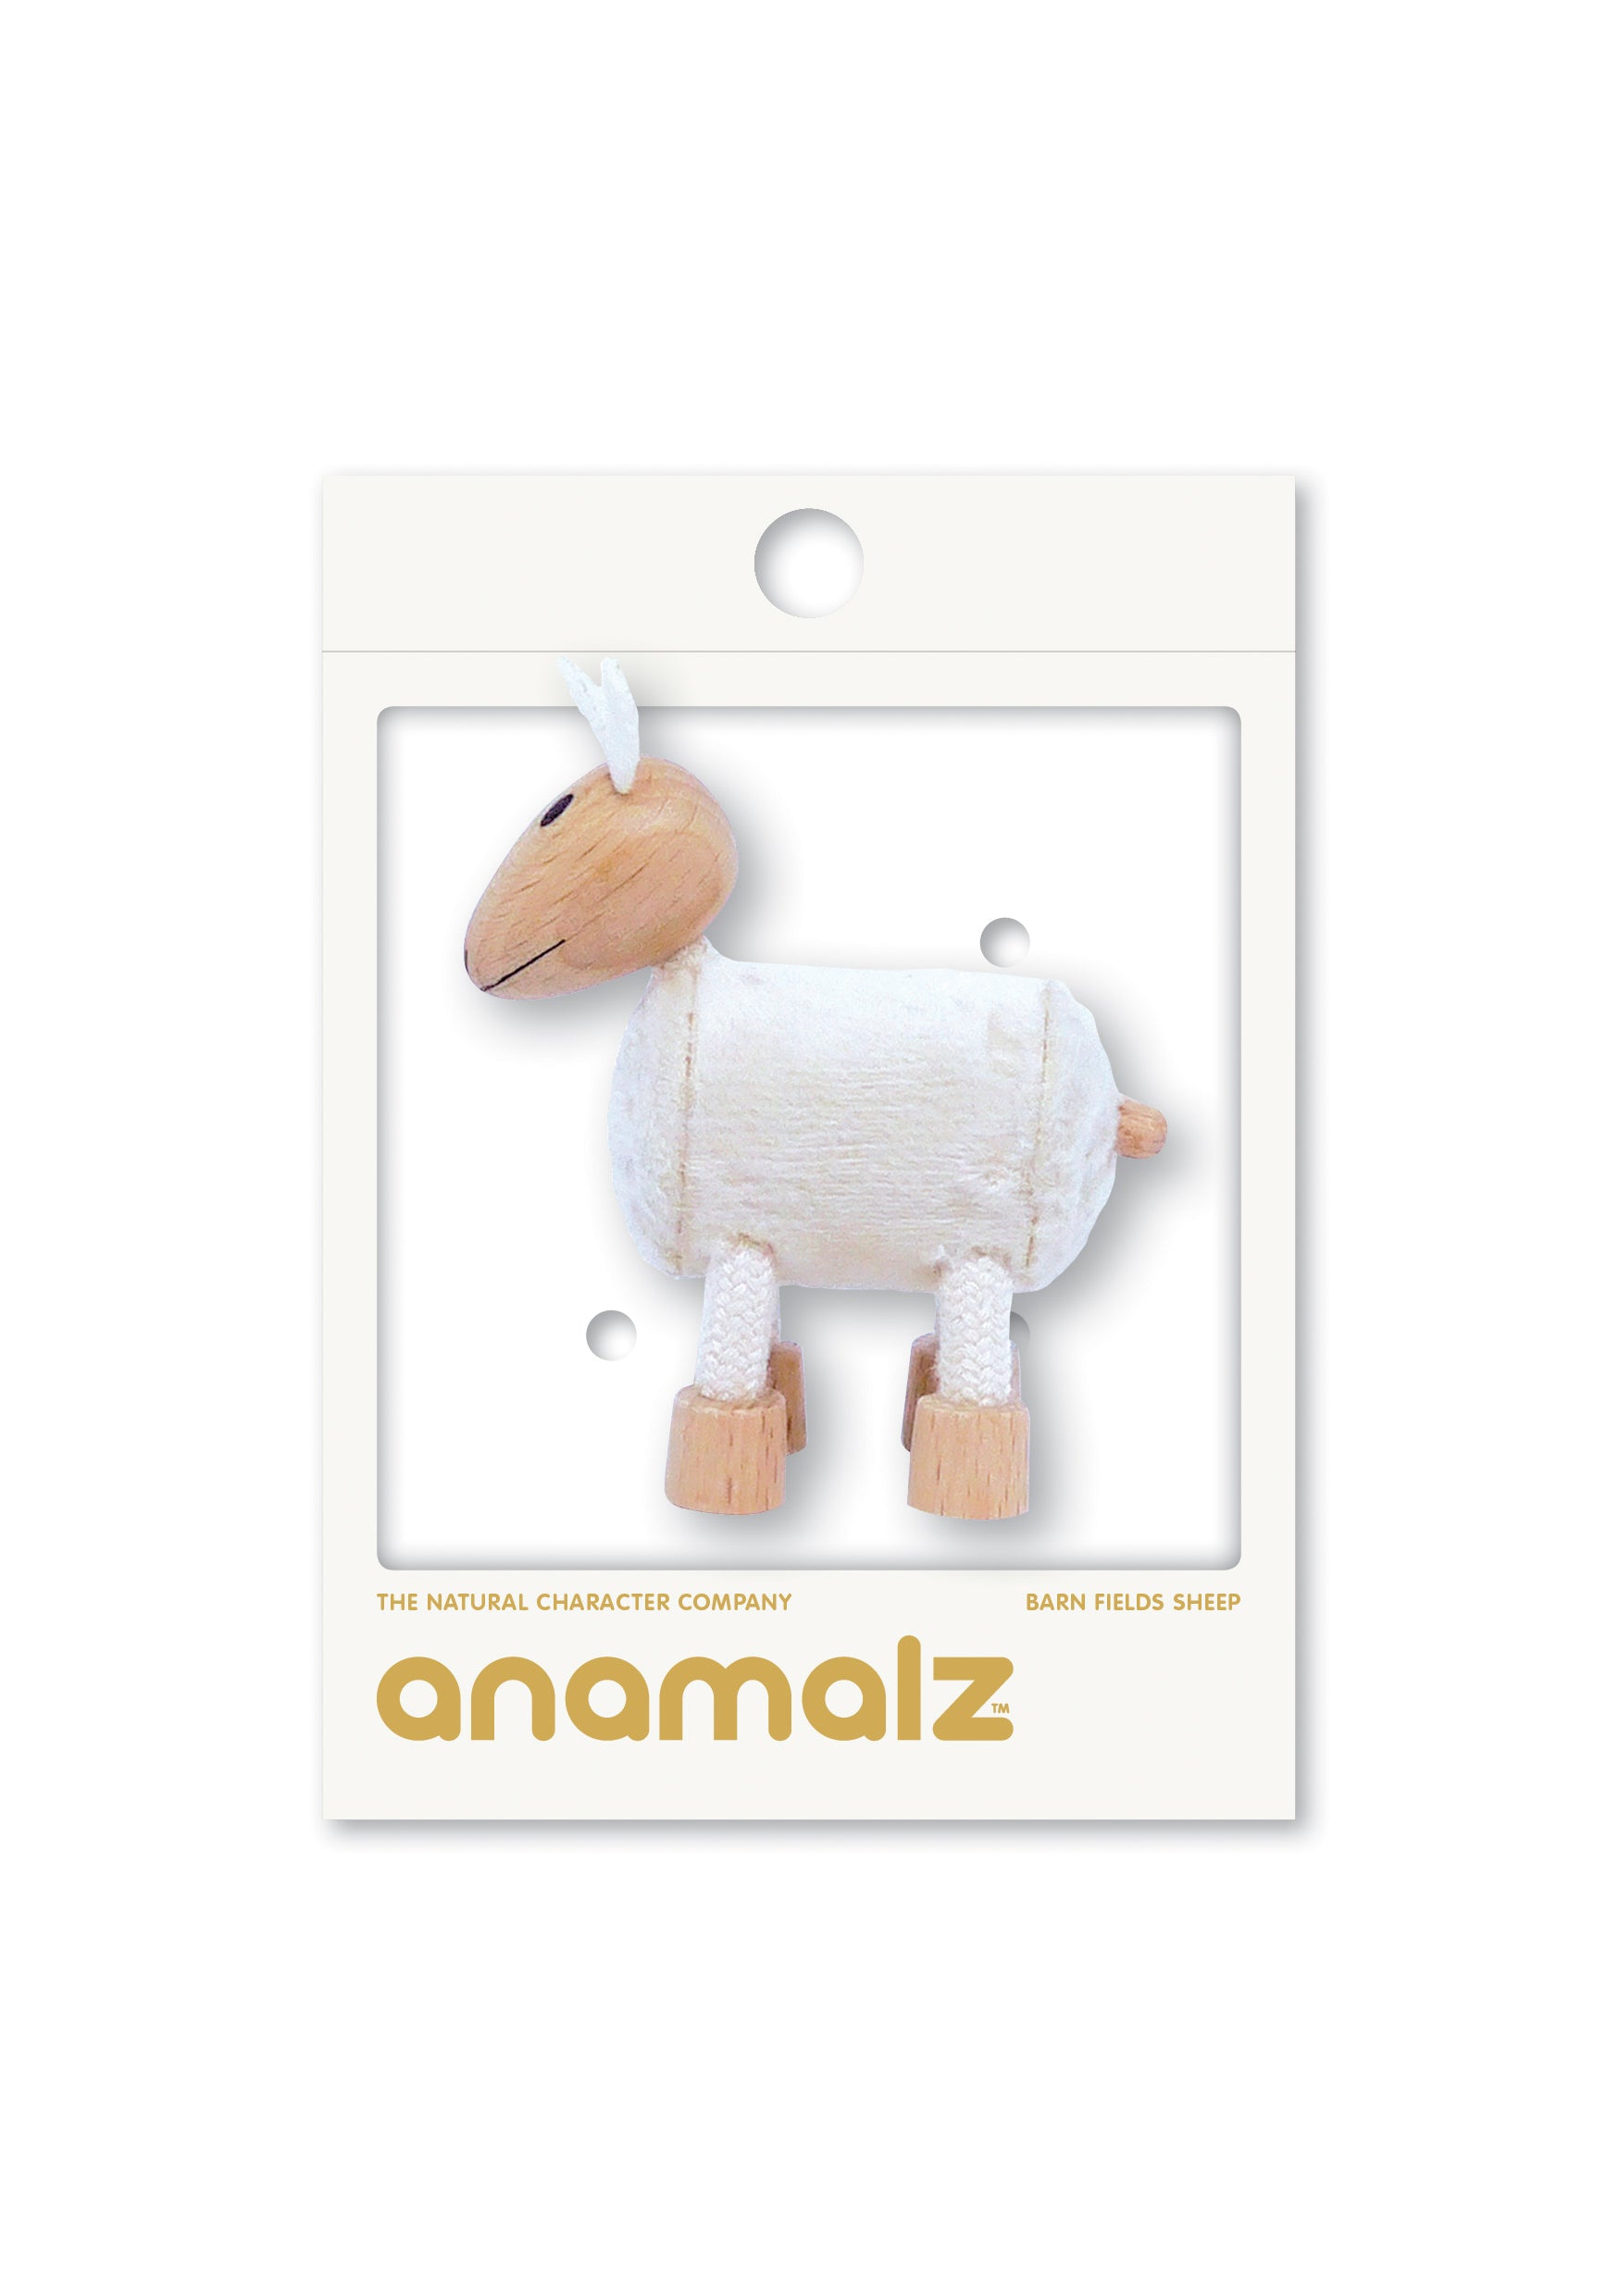 Adorable eco-friendly wooden sheep toy with soft white wool coat and moveable head, perfect for imaginative play and learning.